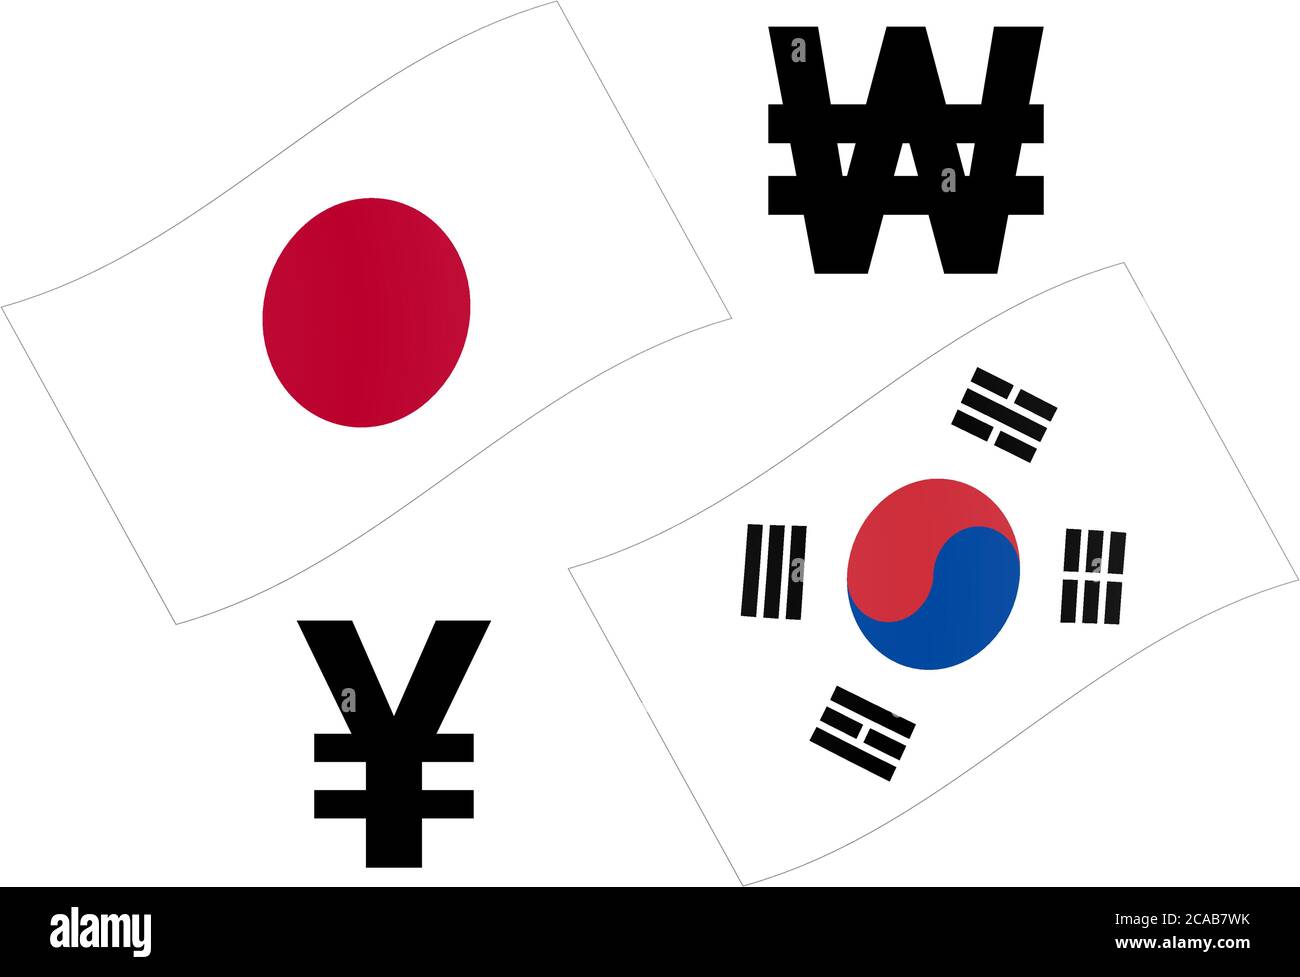 JPYKRW forex currency pair vector illustration. Japanese and Korean flag, with Yen and Won symbol. Stock Vector